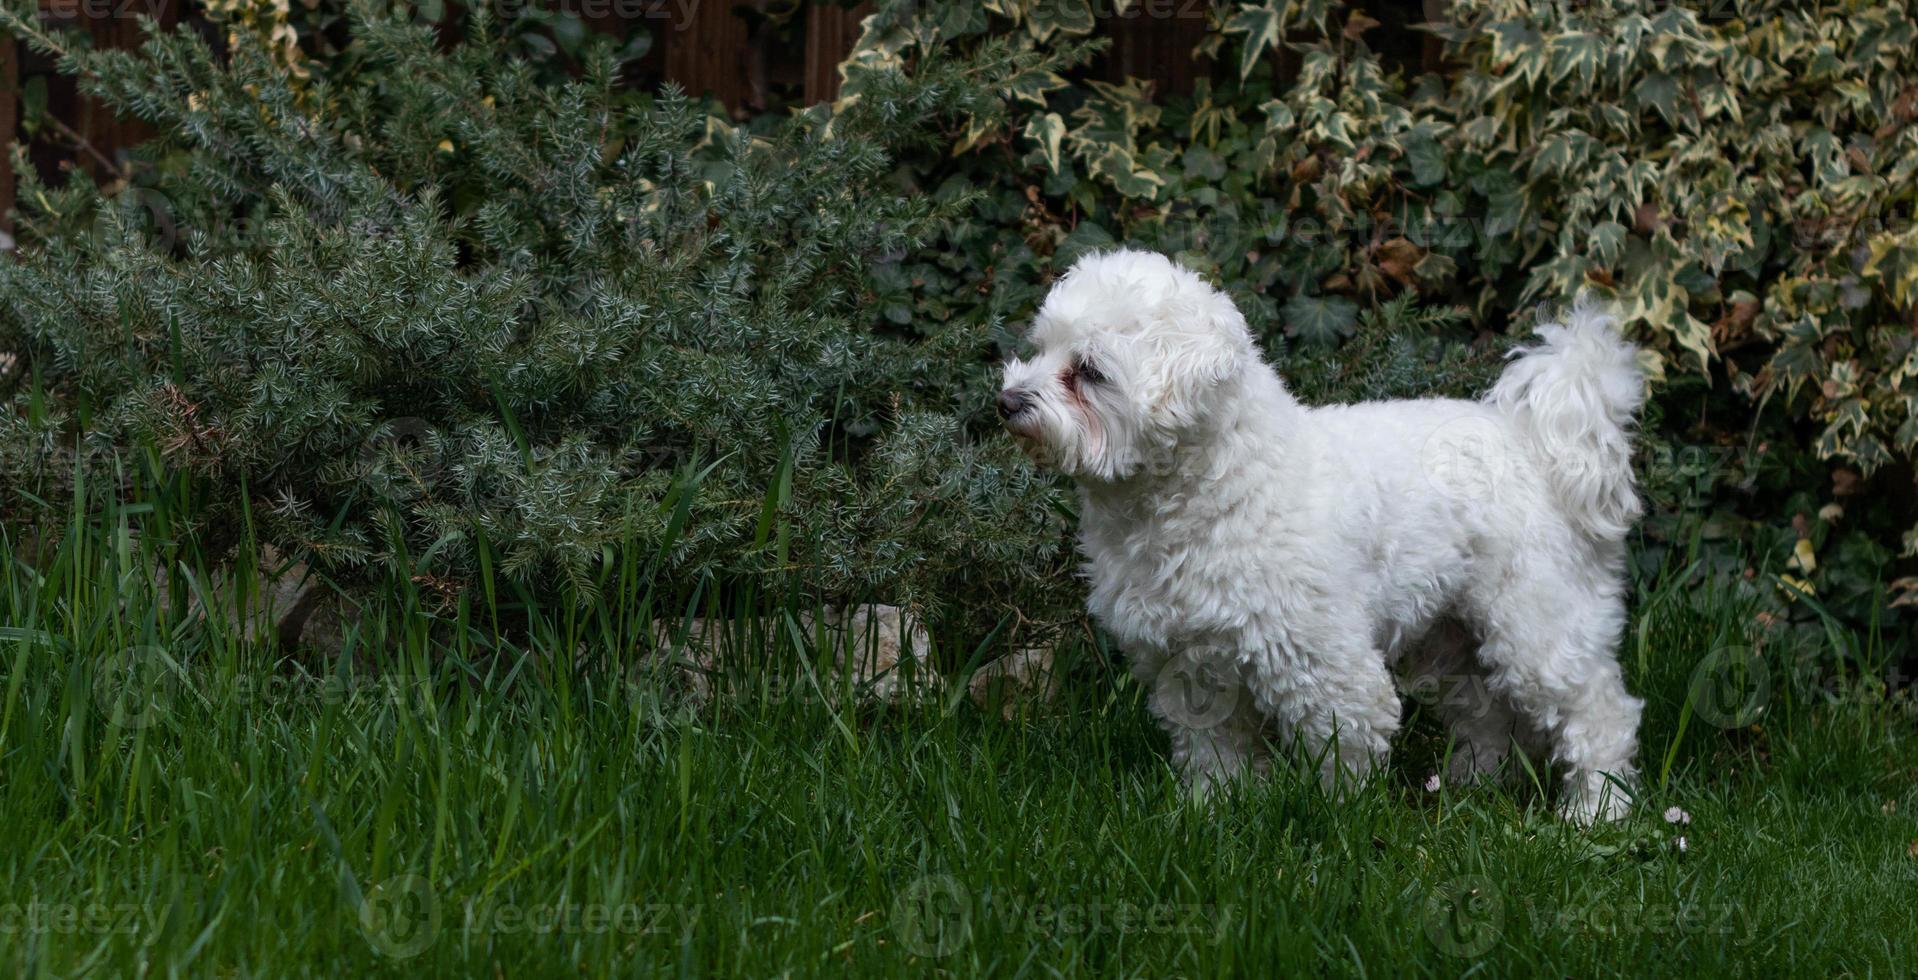 Bichon maltes staring at something in the grass photo